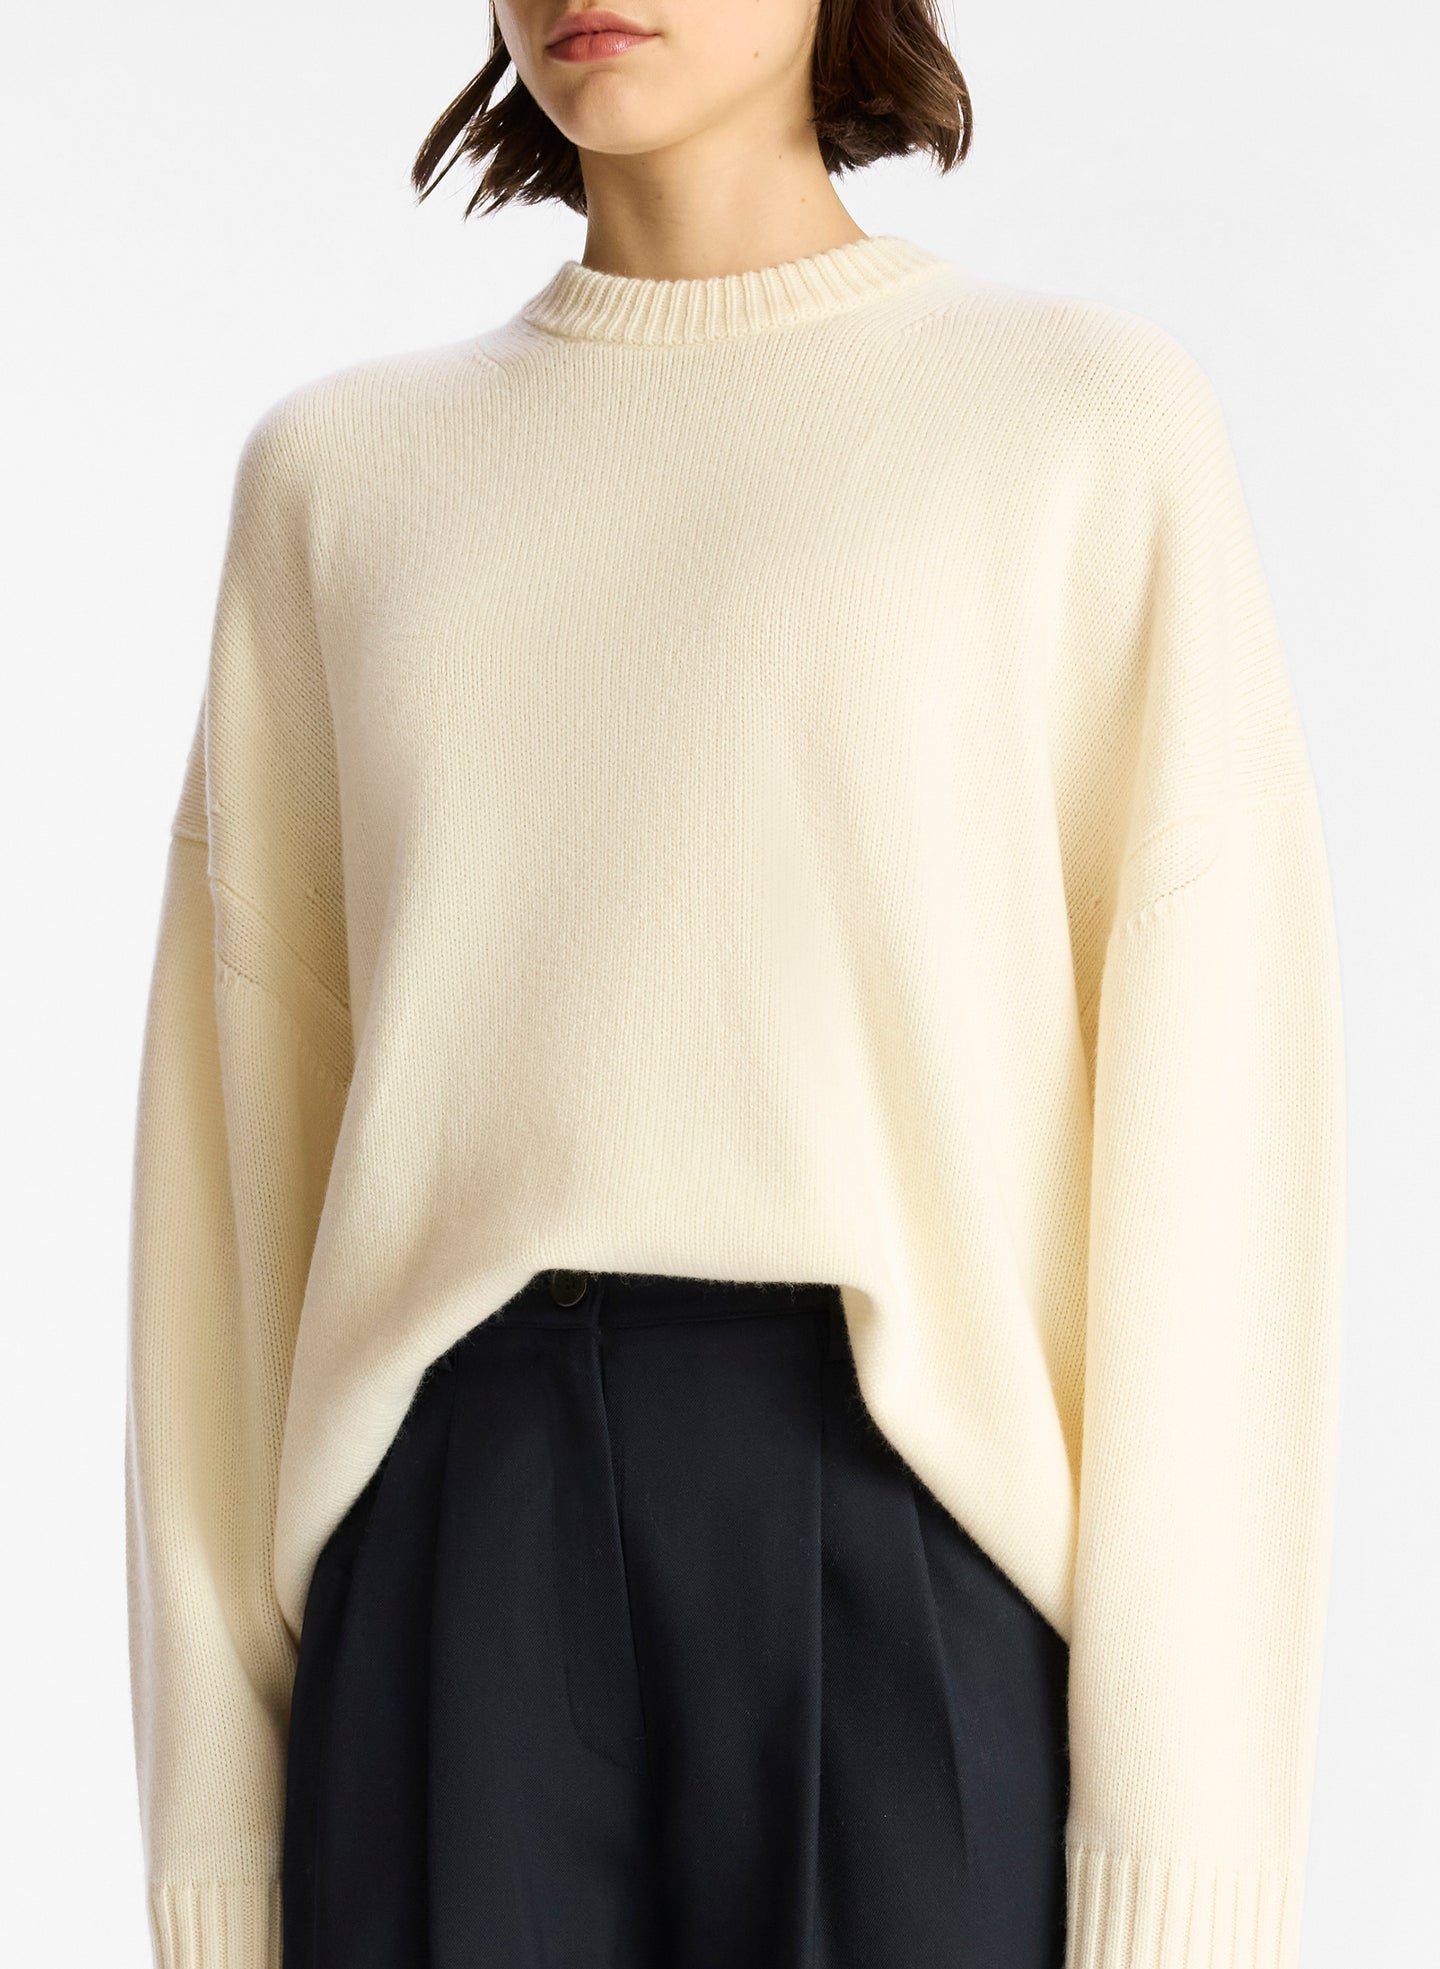 detail view of woman wearing off white cashmere long sleeve sweater